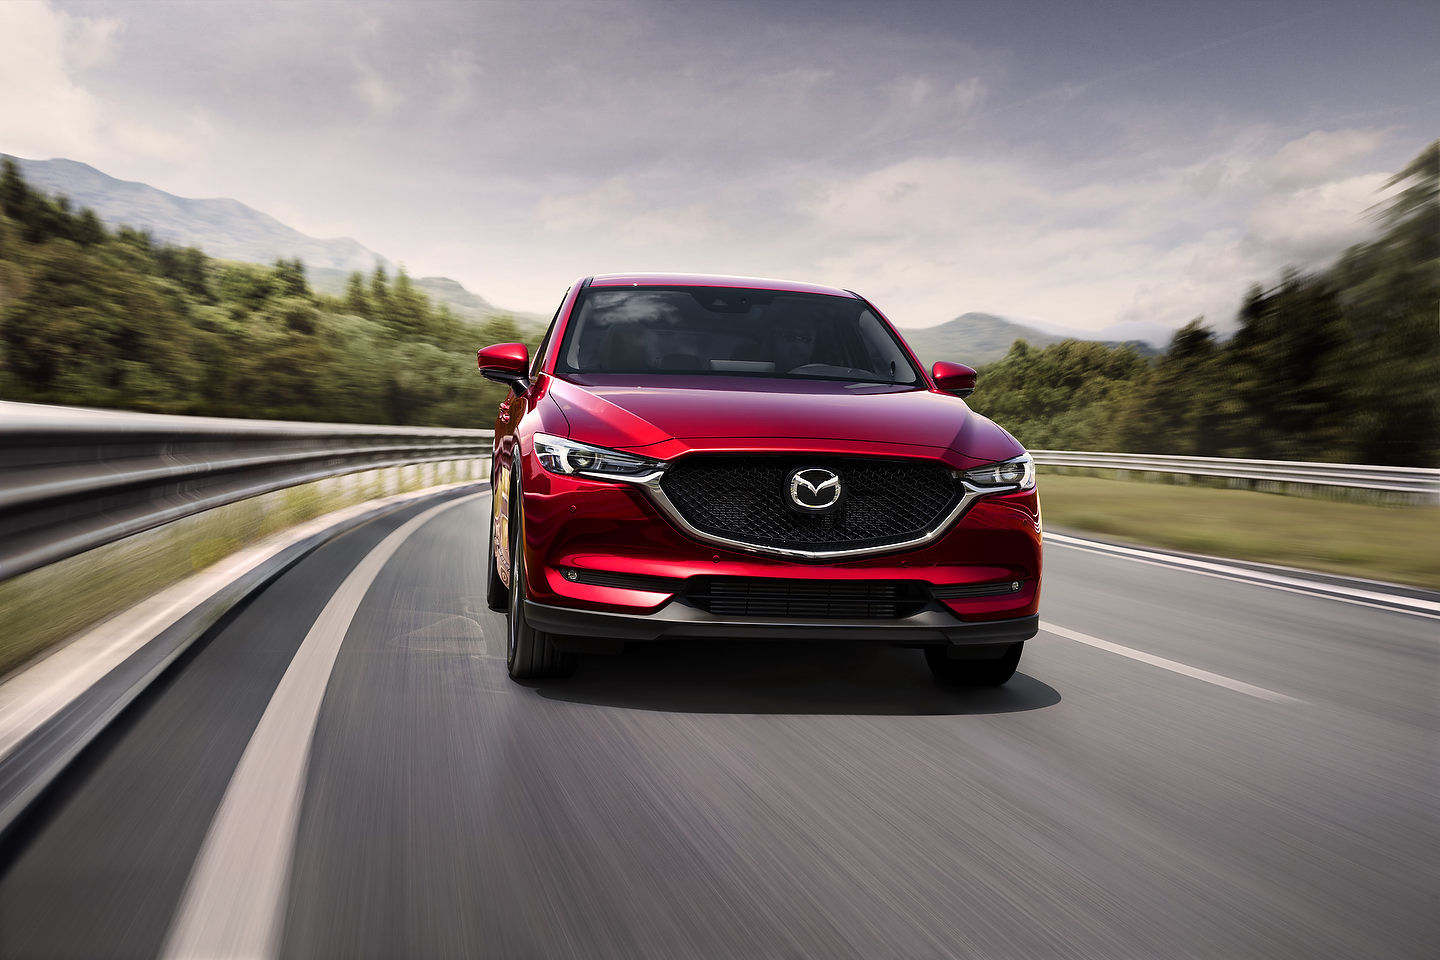 The 2019 Mazda CX-5 stands out among pre-owned SUVs